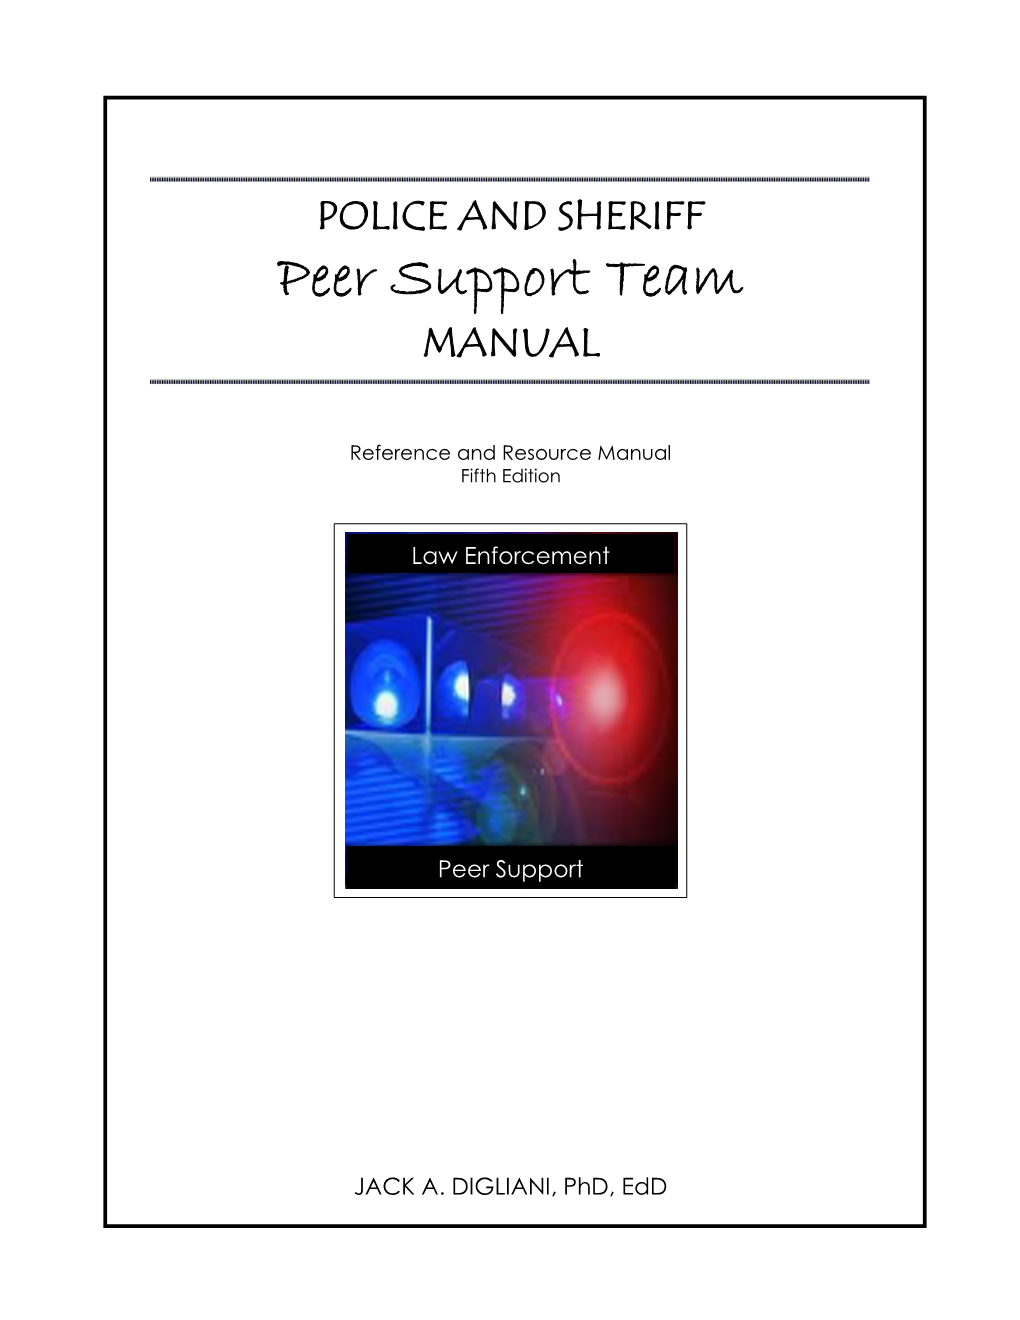 POLICE and SHERIFF Peer Support Team MANUAL